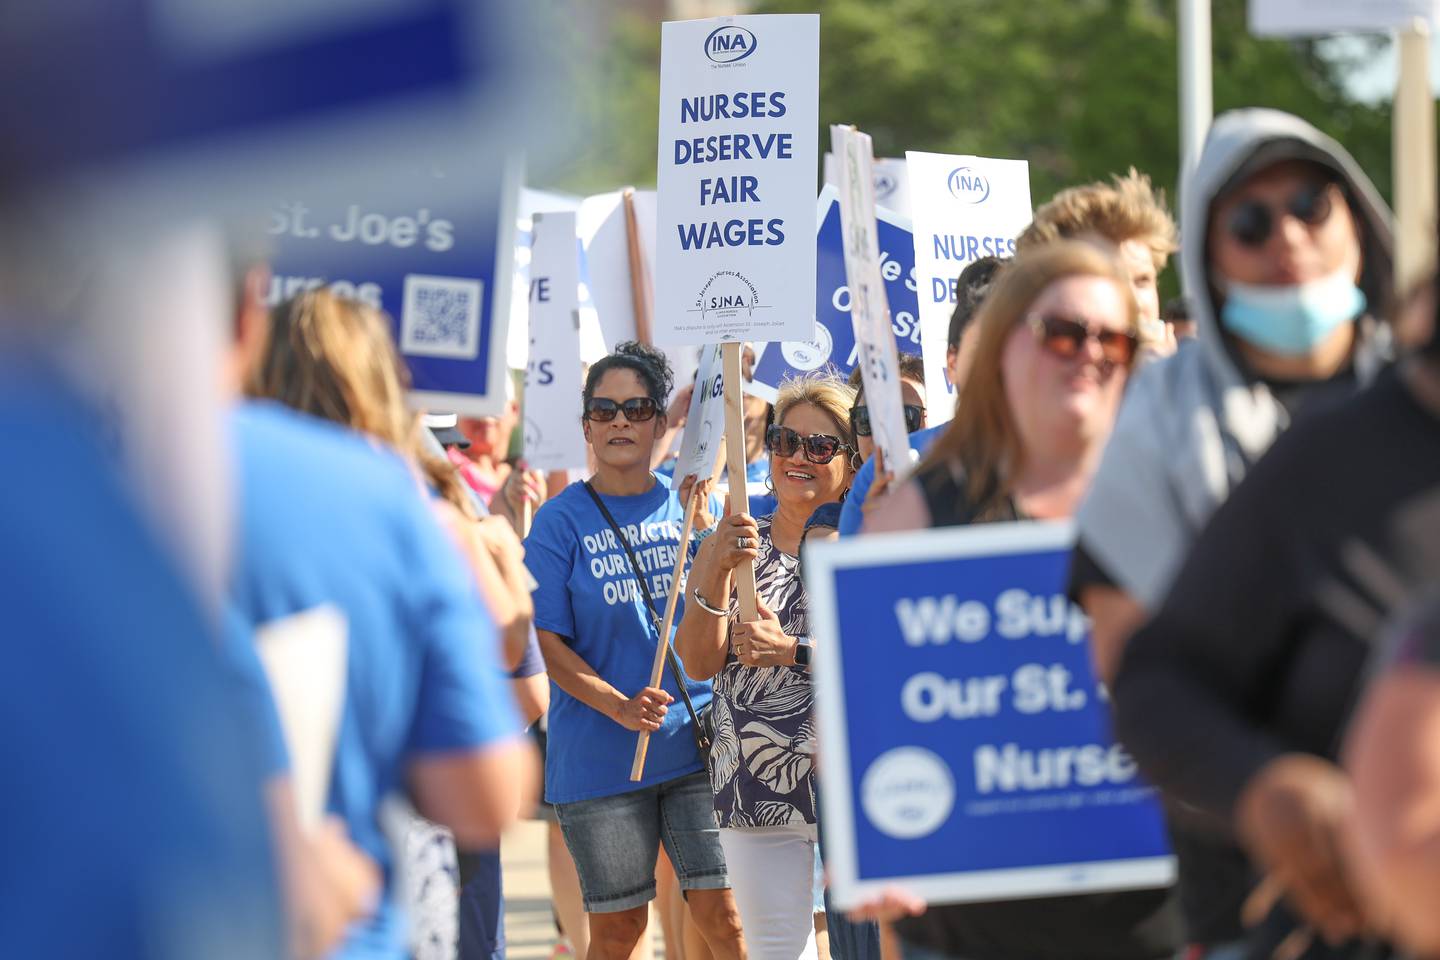 St. Joseph nurses and supporters picket outside St. Joseph Hospital as contract negotiations continue on Thursday, July 20th, 2023 in Joliet.